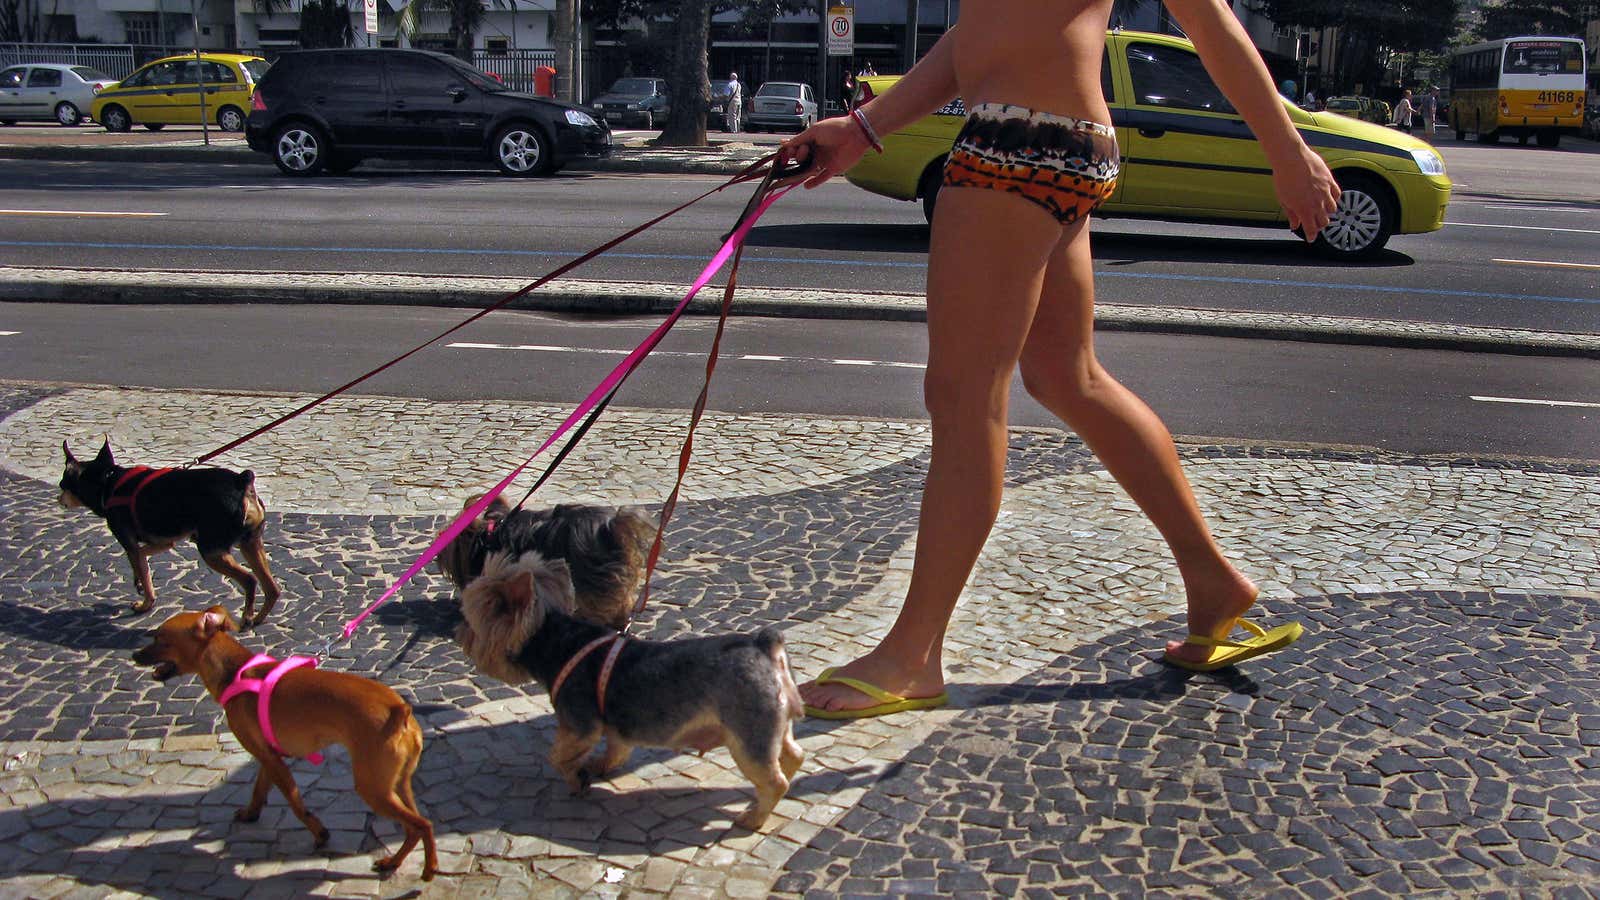 In this shot of Rio, there are four small dogs per capita.